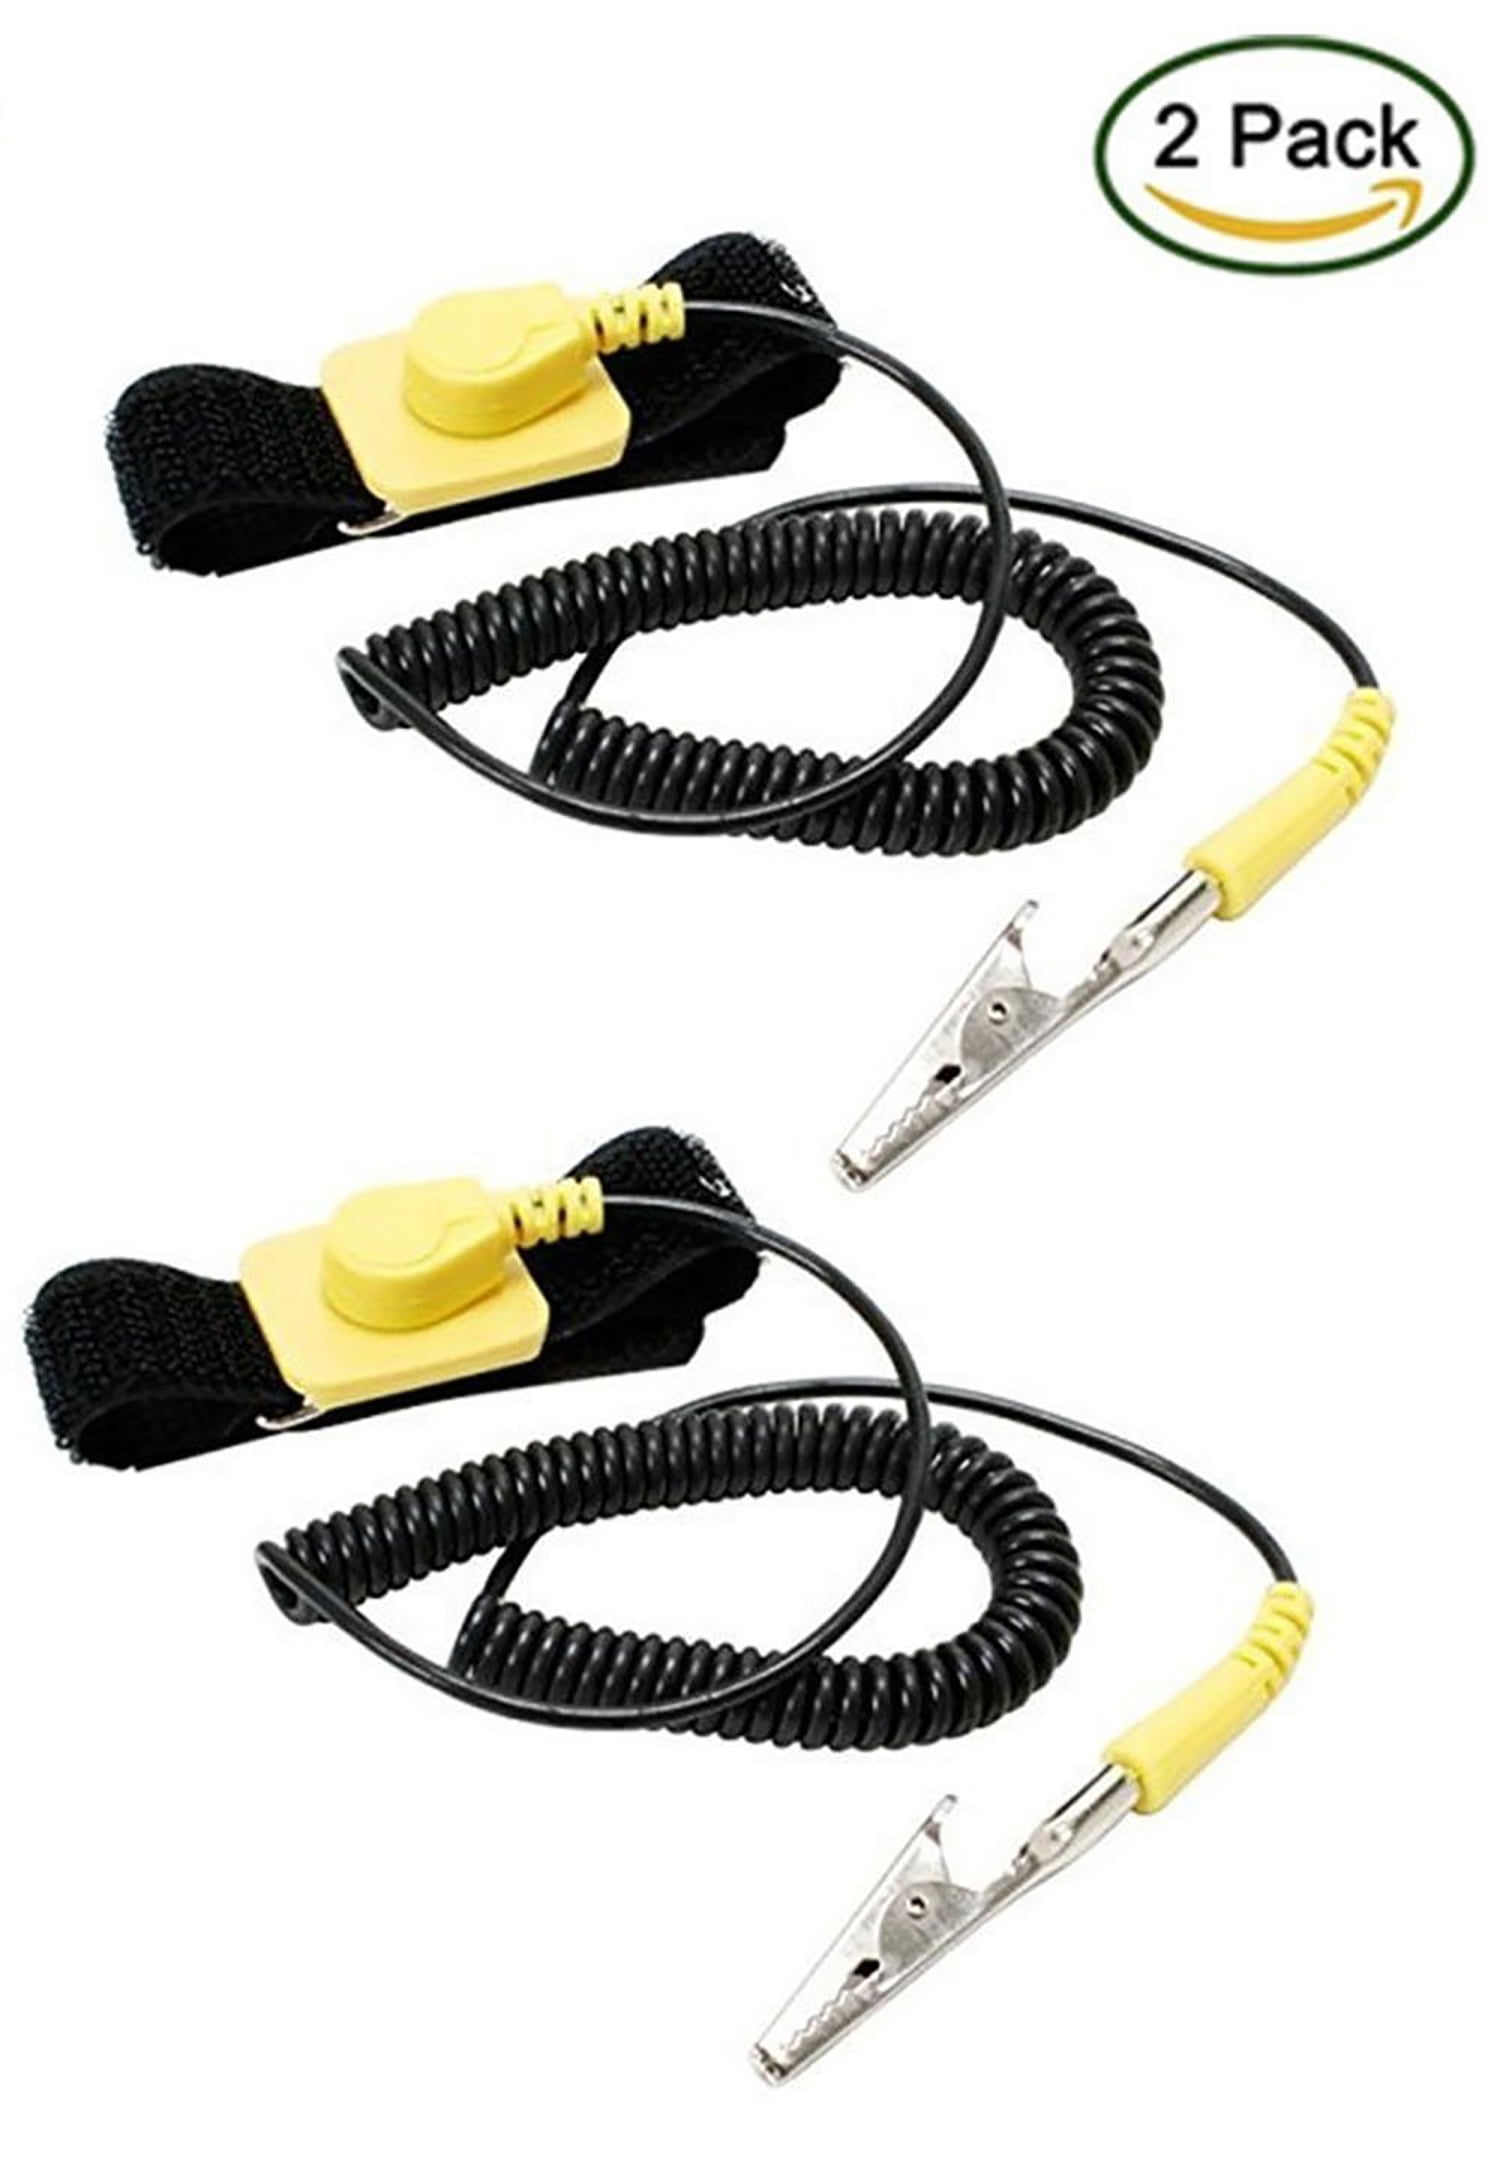 Anti-Static Adjustable Grounding Wrist Strap Band Components Tools Black Yellow